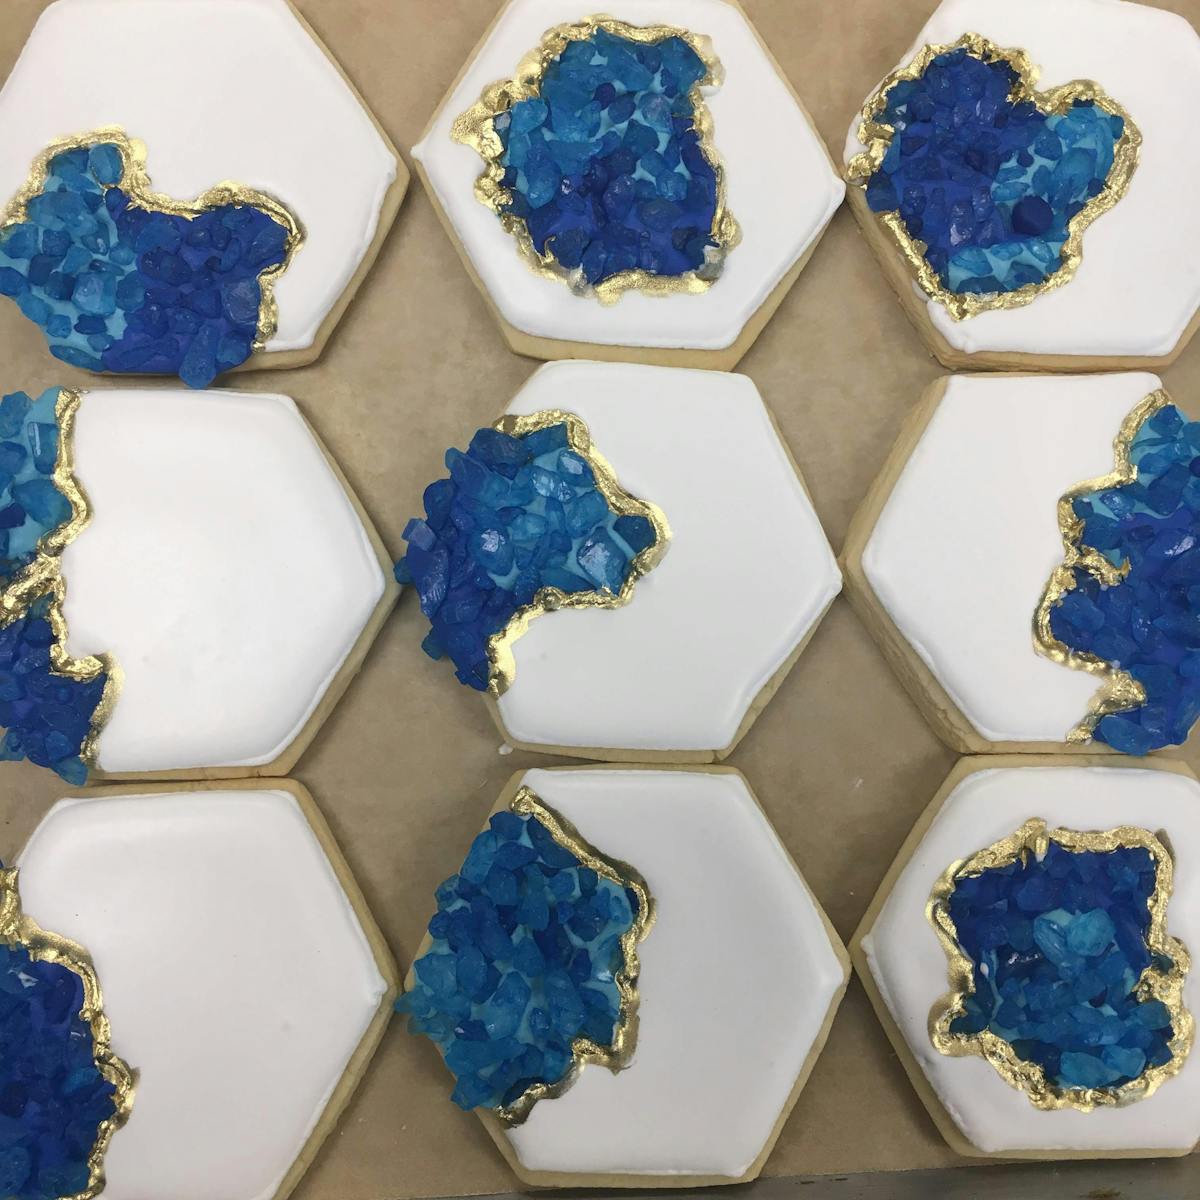 Stitch shaped cookies